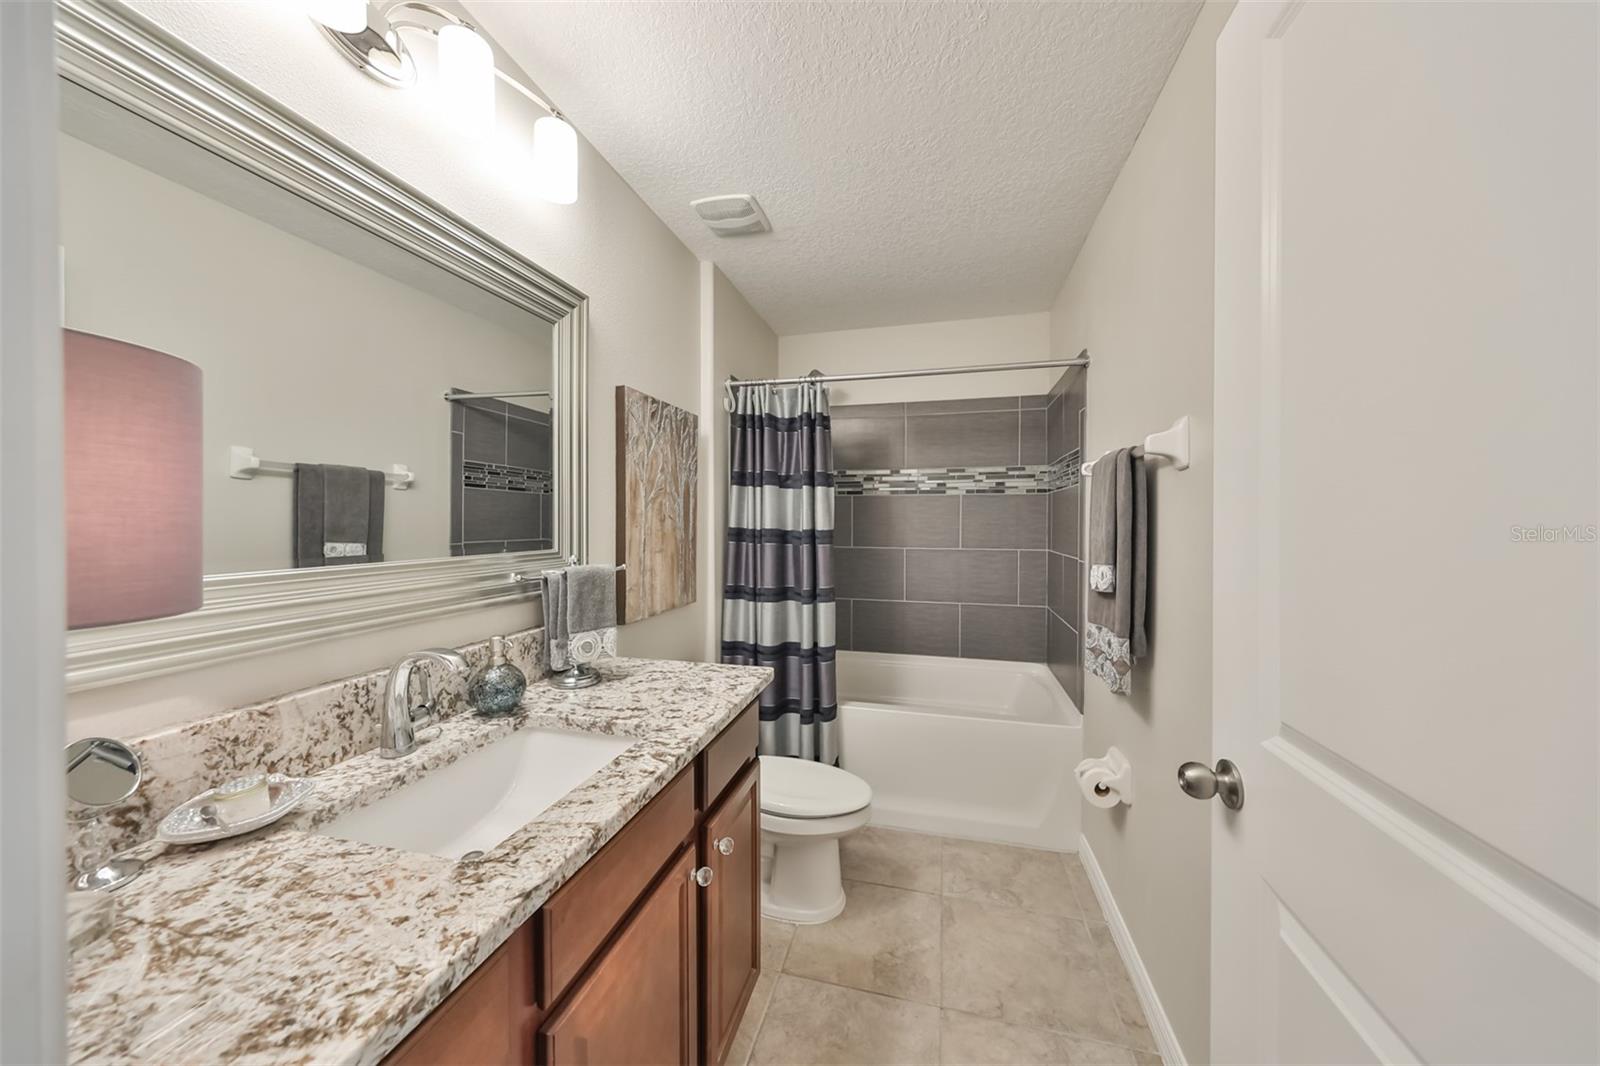 Guest bathroom is large, contemporary with upgraded tile work and granite counters.